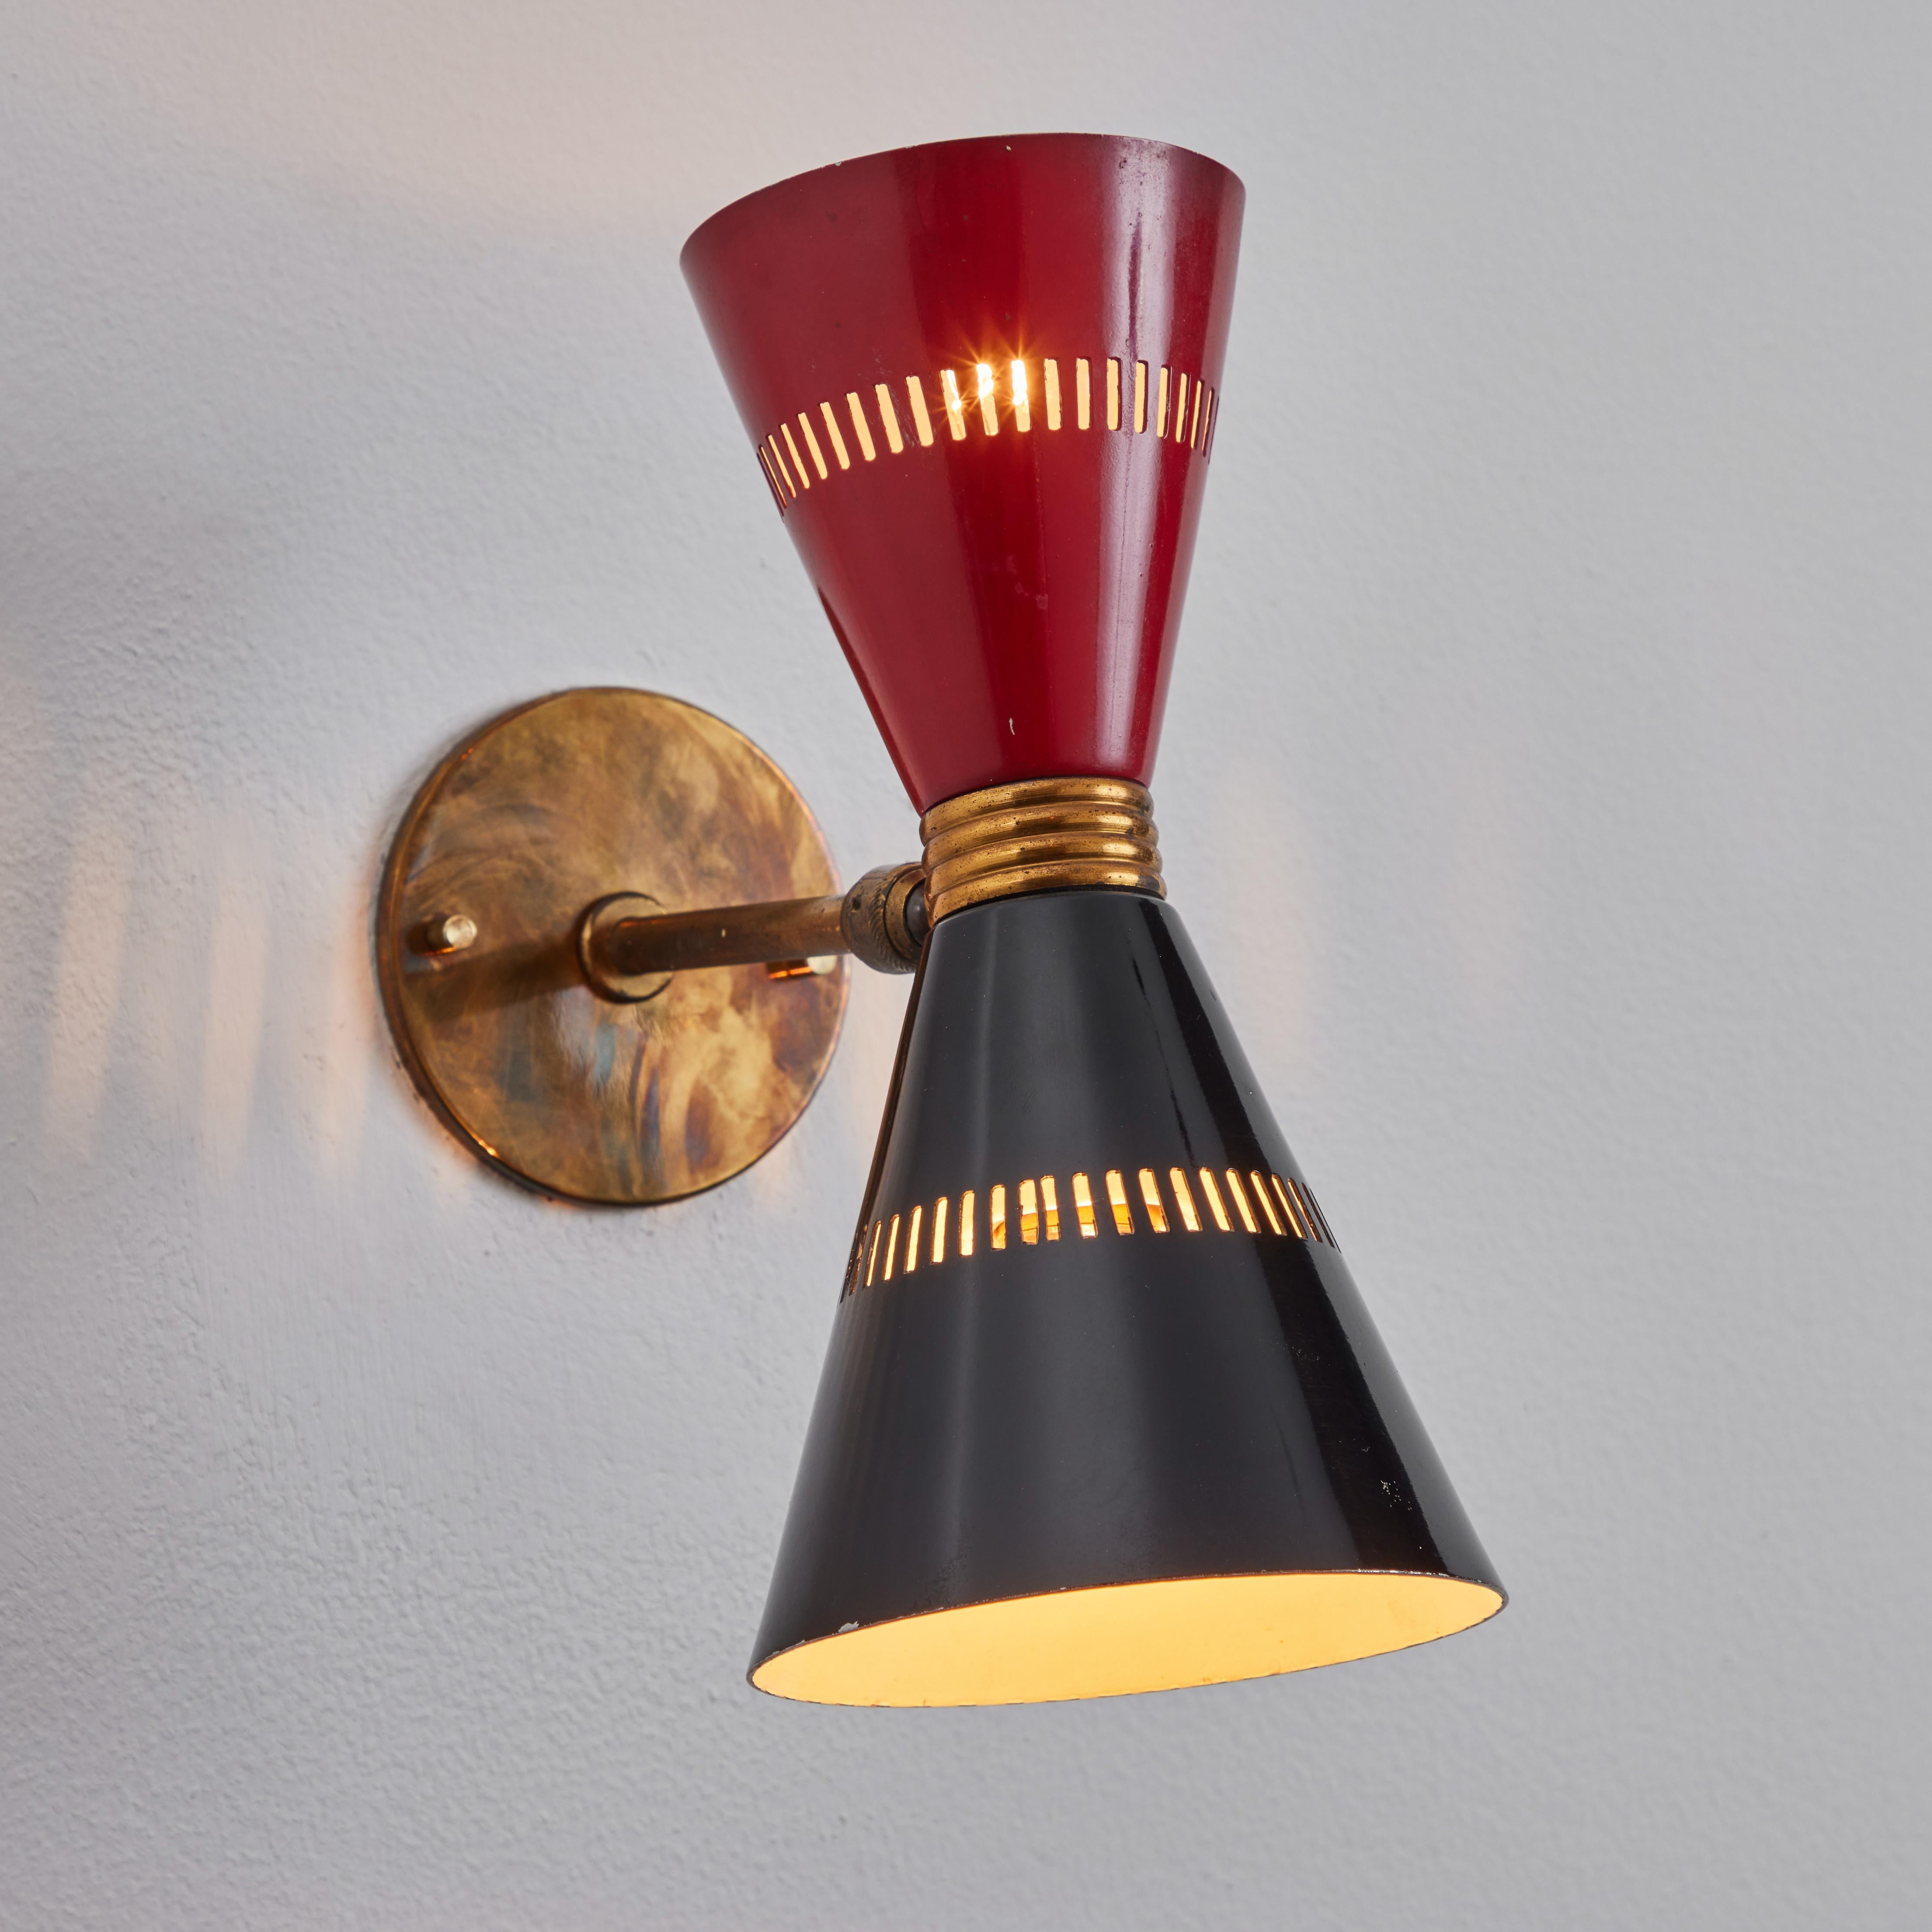 Pair of 1950s red & black Stilnovo Diabolo sconces. Executed in in perforated black and red painted metal and patinated brass. Lamp adjusts freely on a flexible ball joint to a variety of angles. A sculptural and refined design characteristic of